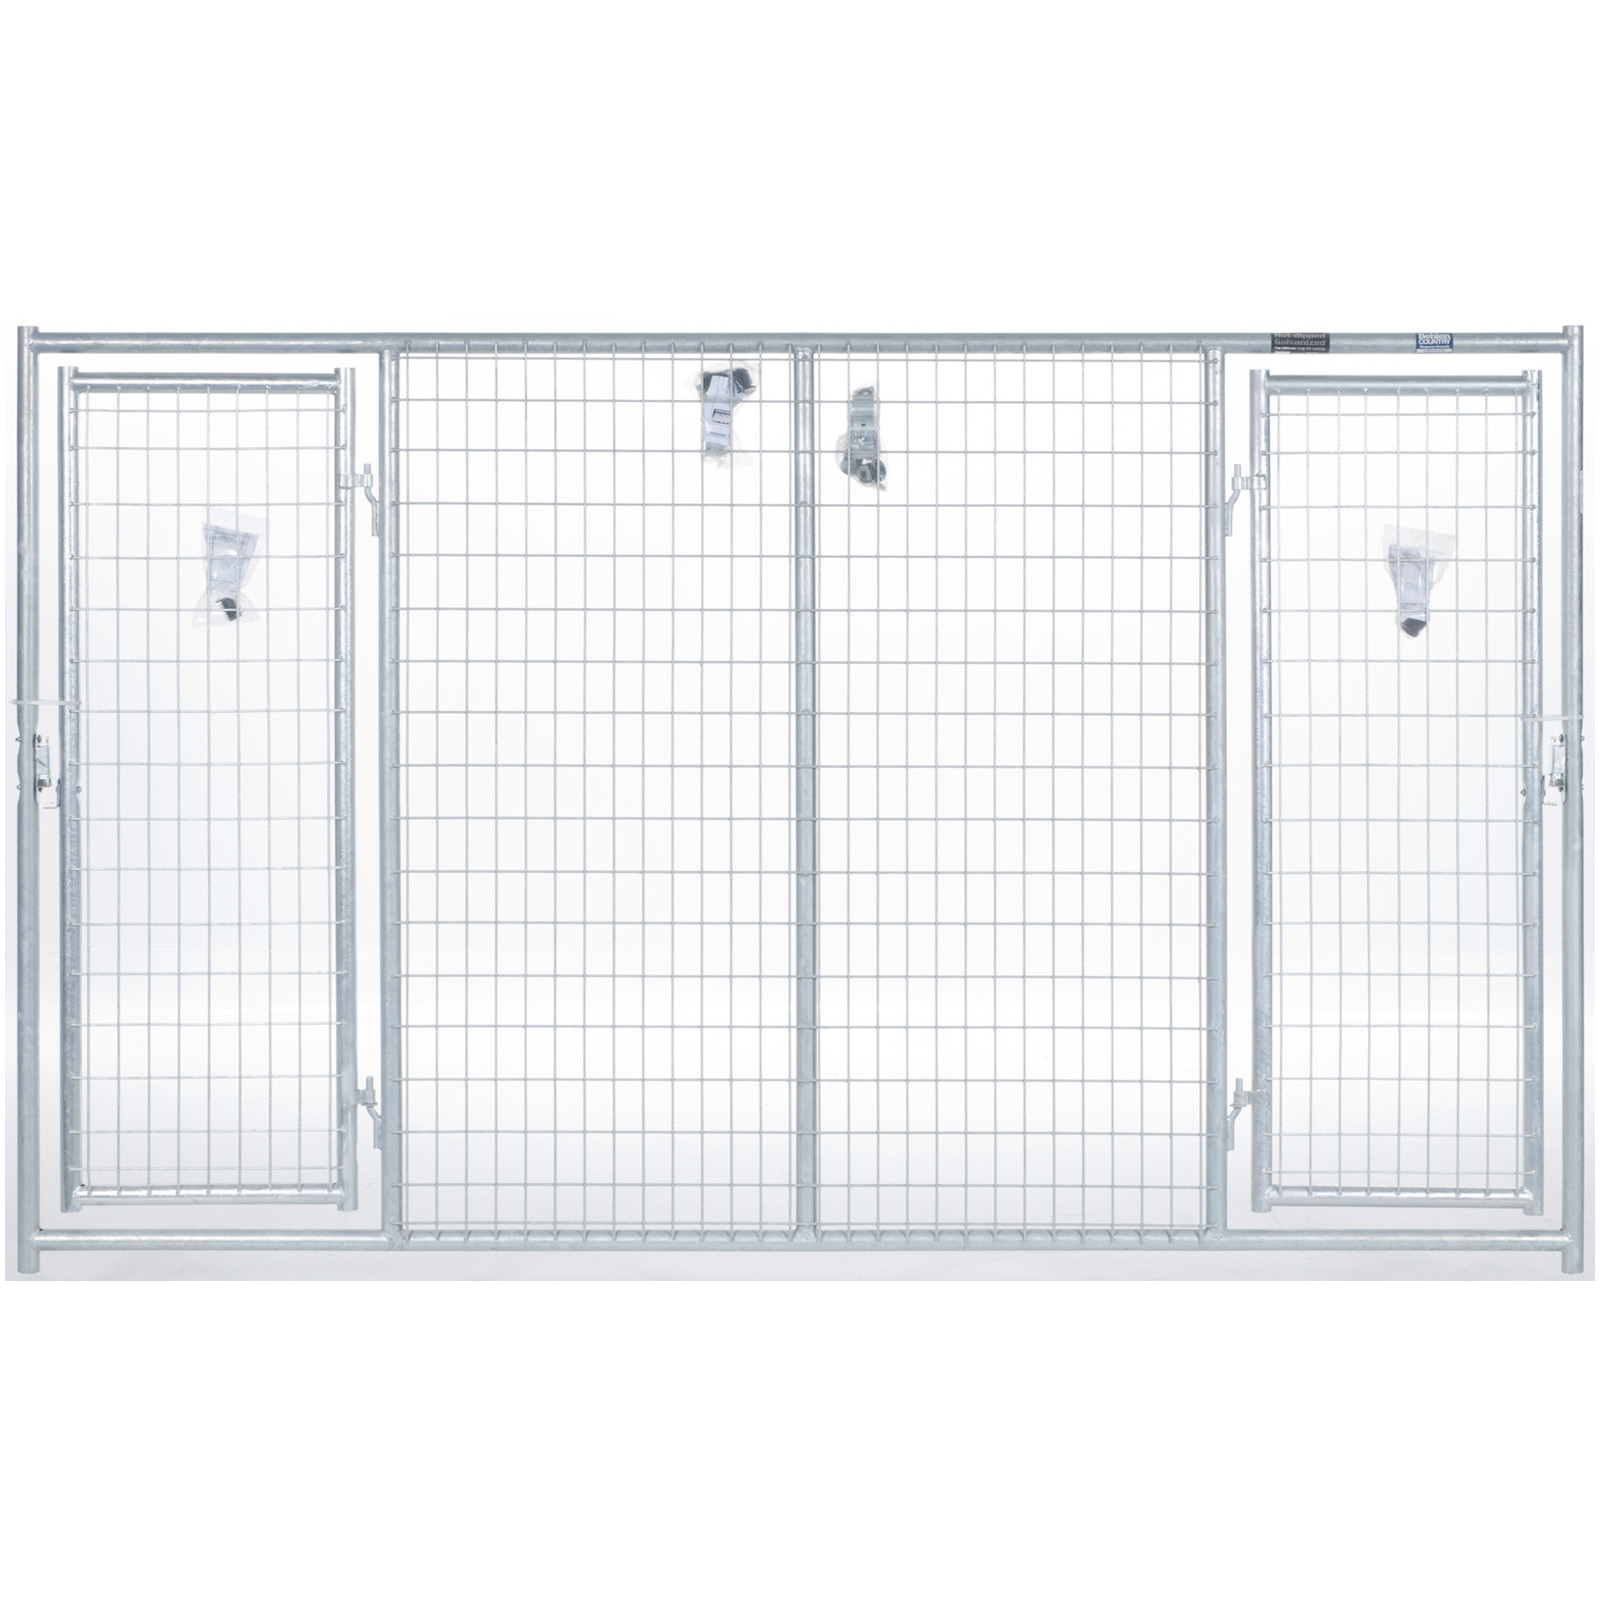 10'x6′ Double Gate Panel | Behlen Country